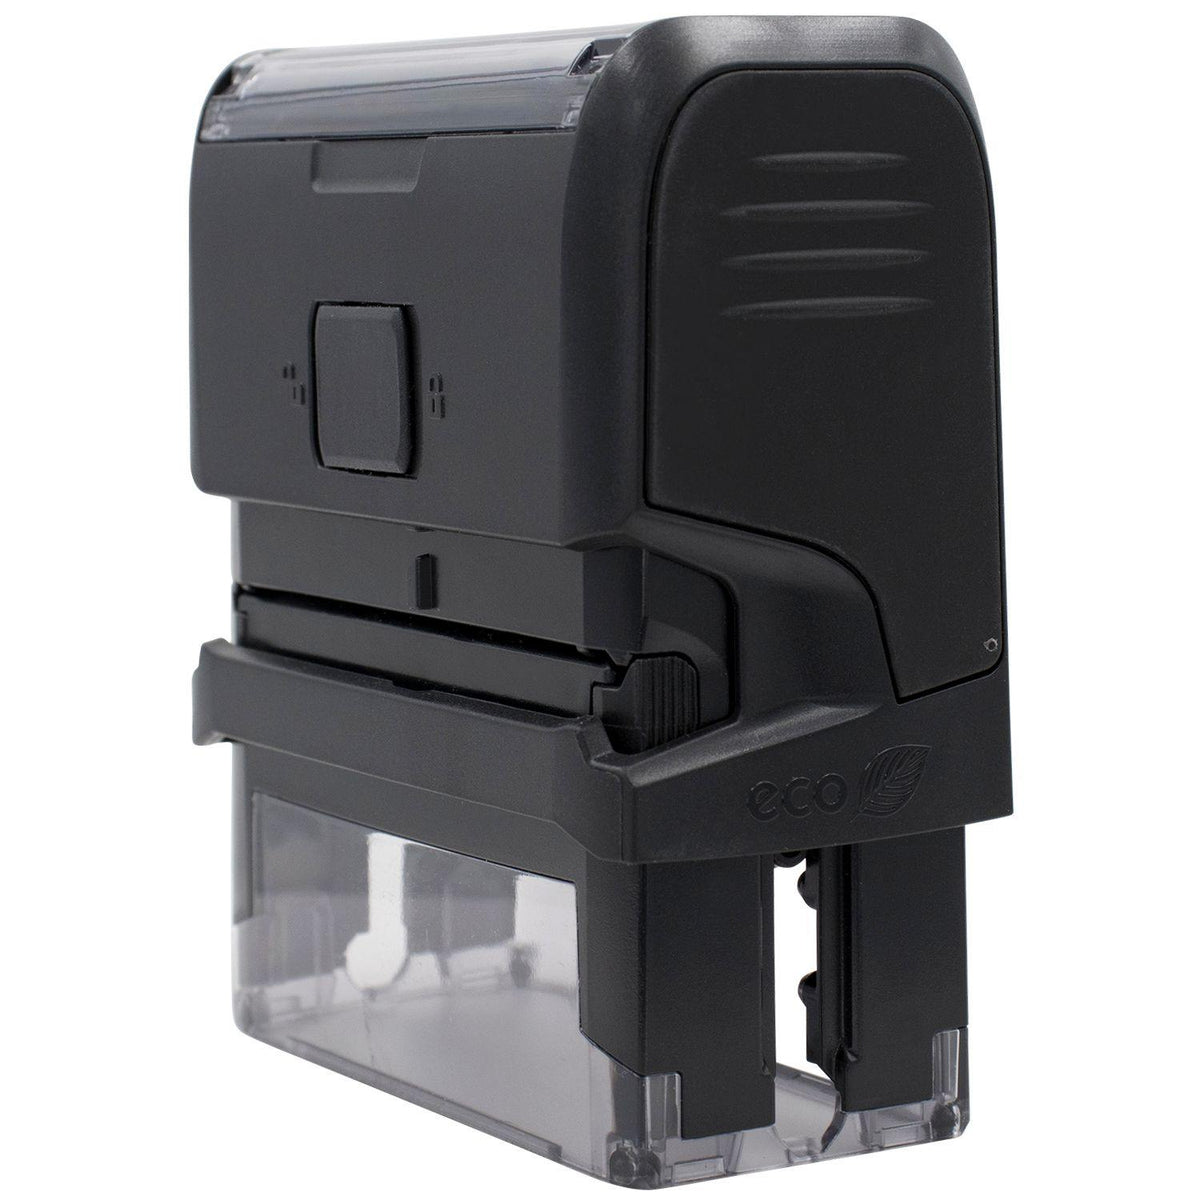 Self-Inking Copy with Letter Stamp - Engineer Seal Stamps - Brand_Trodat, Impression Size_Small, Stamp Type_Self-Inking Stamp